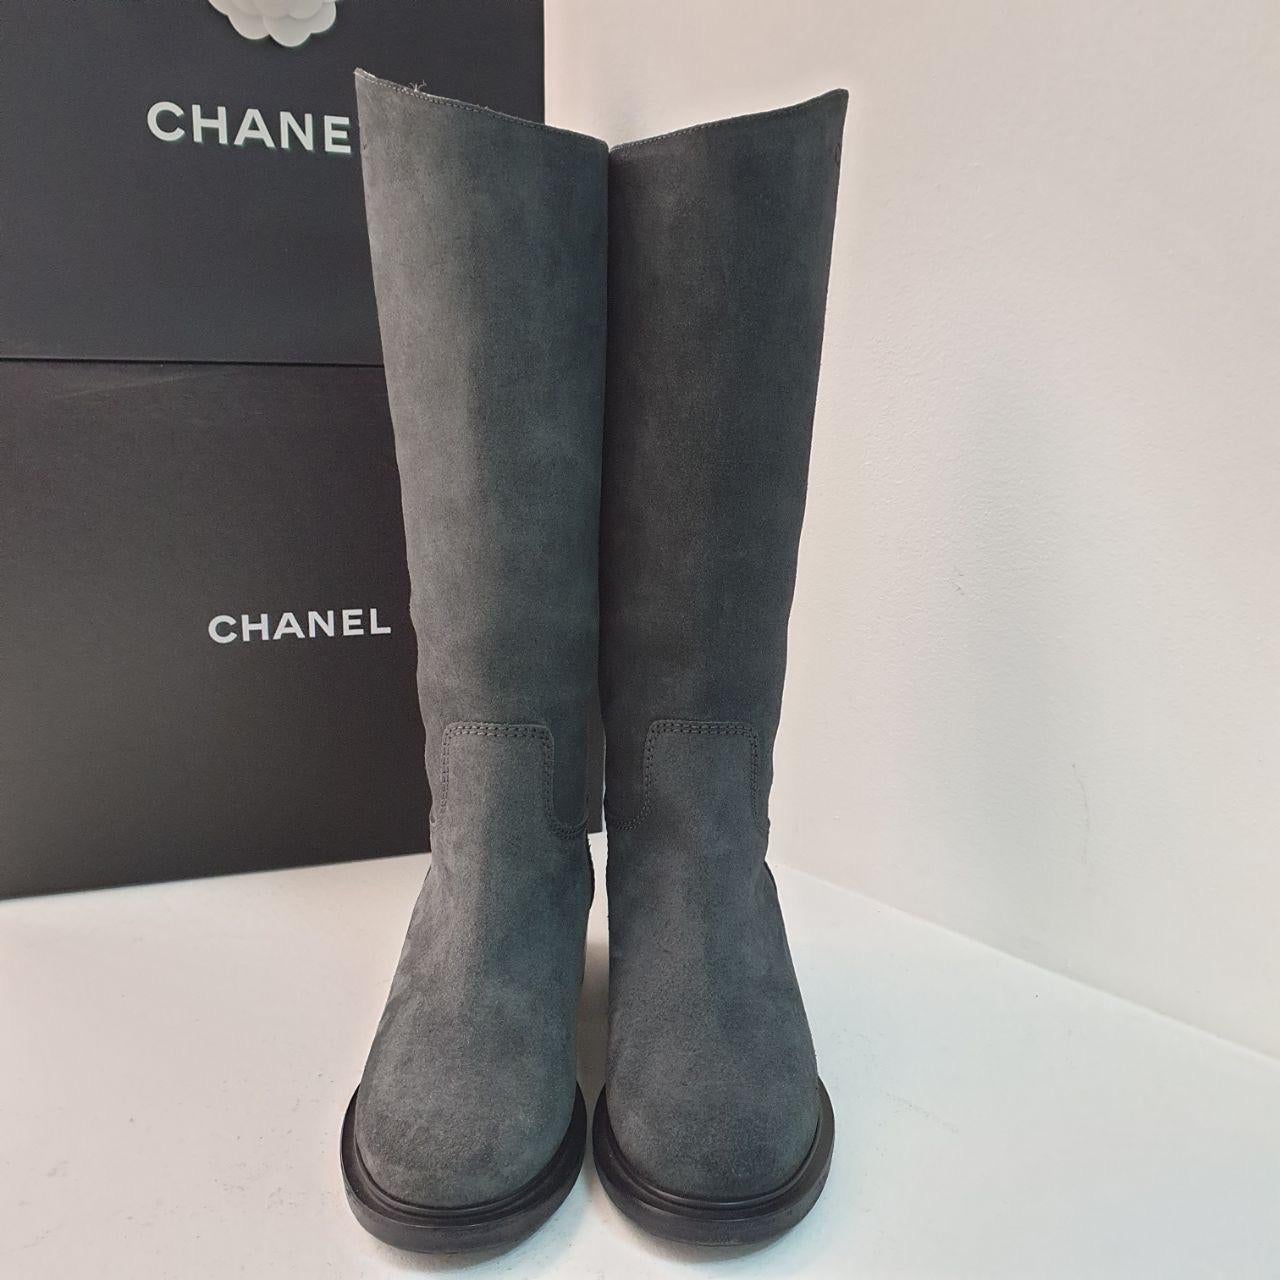 Chanel Grey Suede Boots In Good Condition For Sale In Krakow, PL